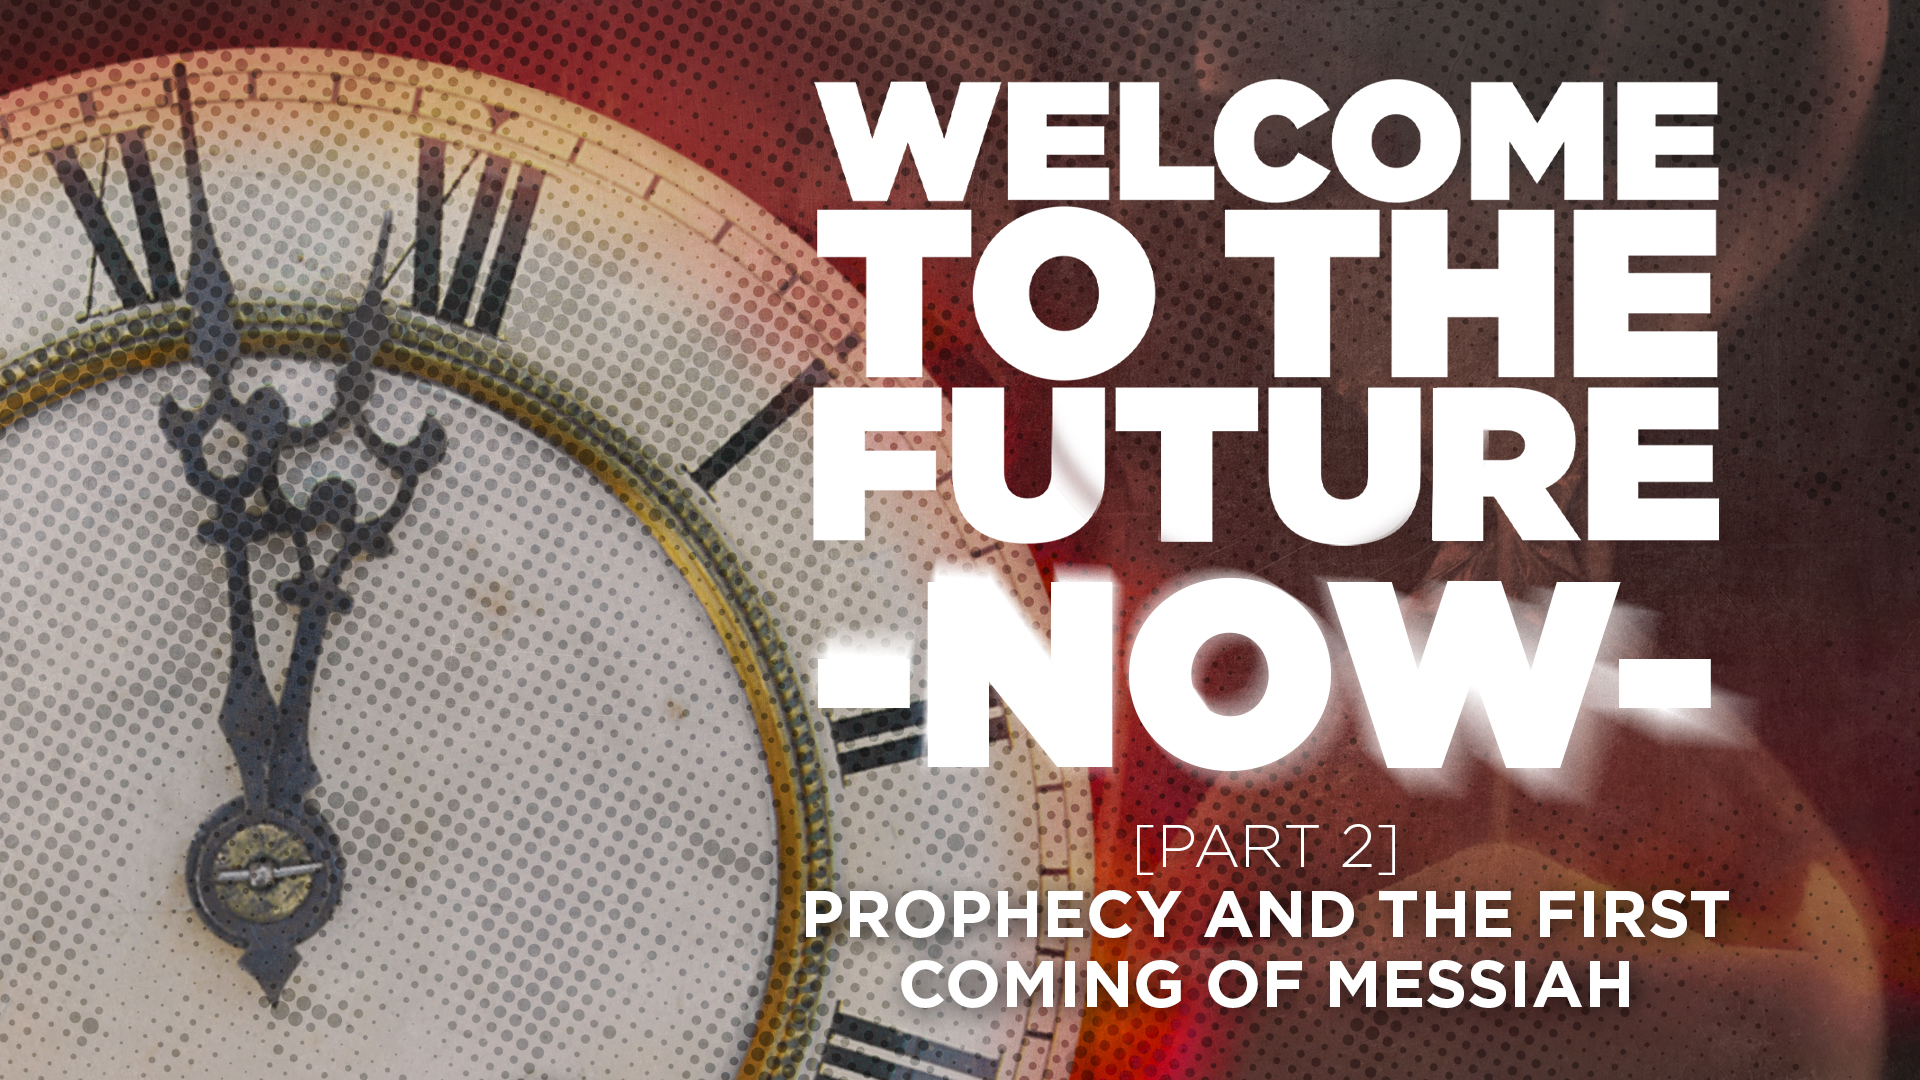 Part 2: Prophecy and the first coming of Messiah